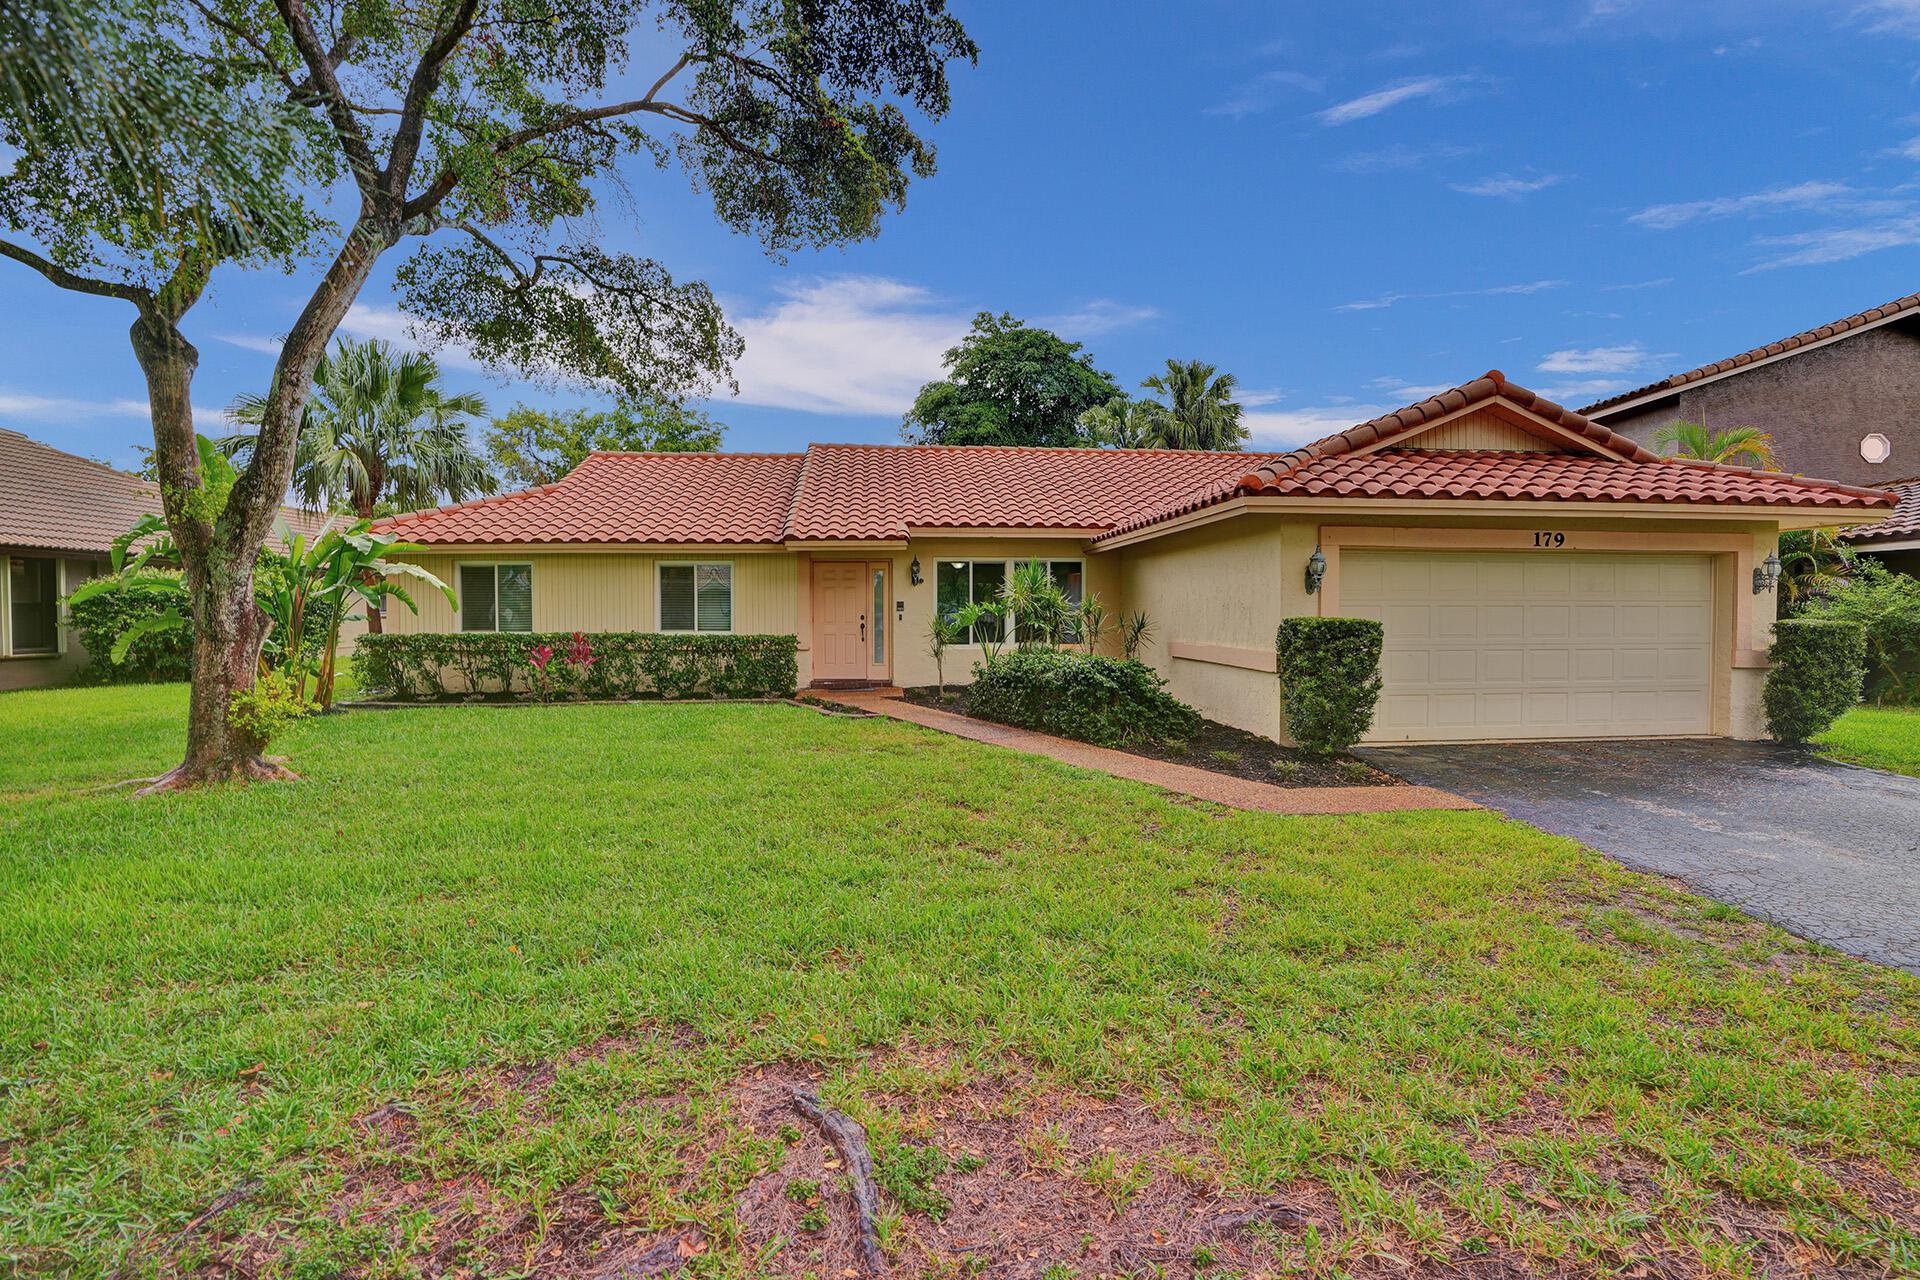 179 NW 104 Avenue, Coral Springs, FL 33071